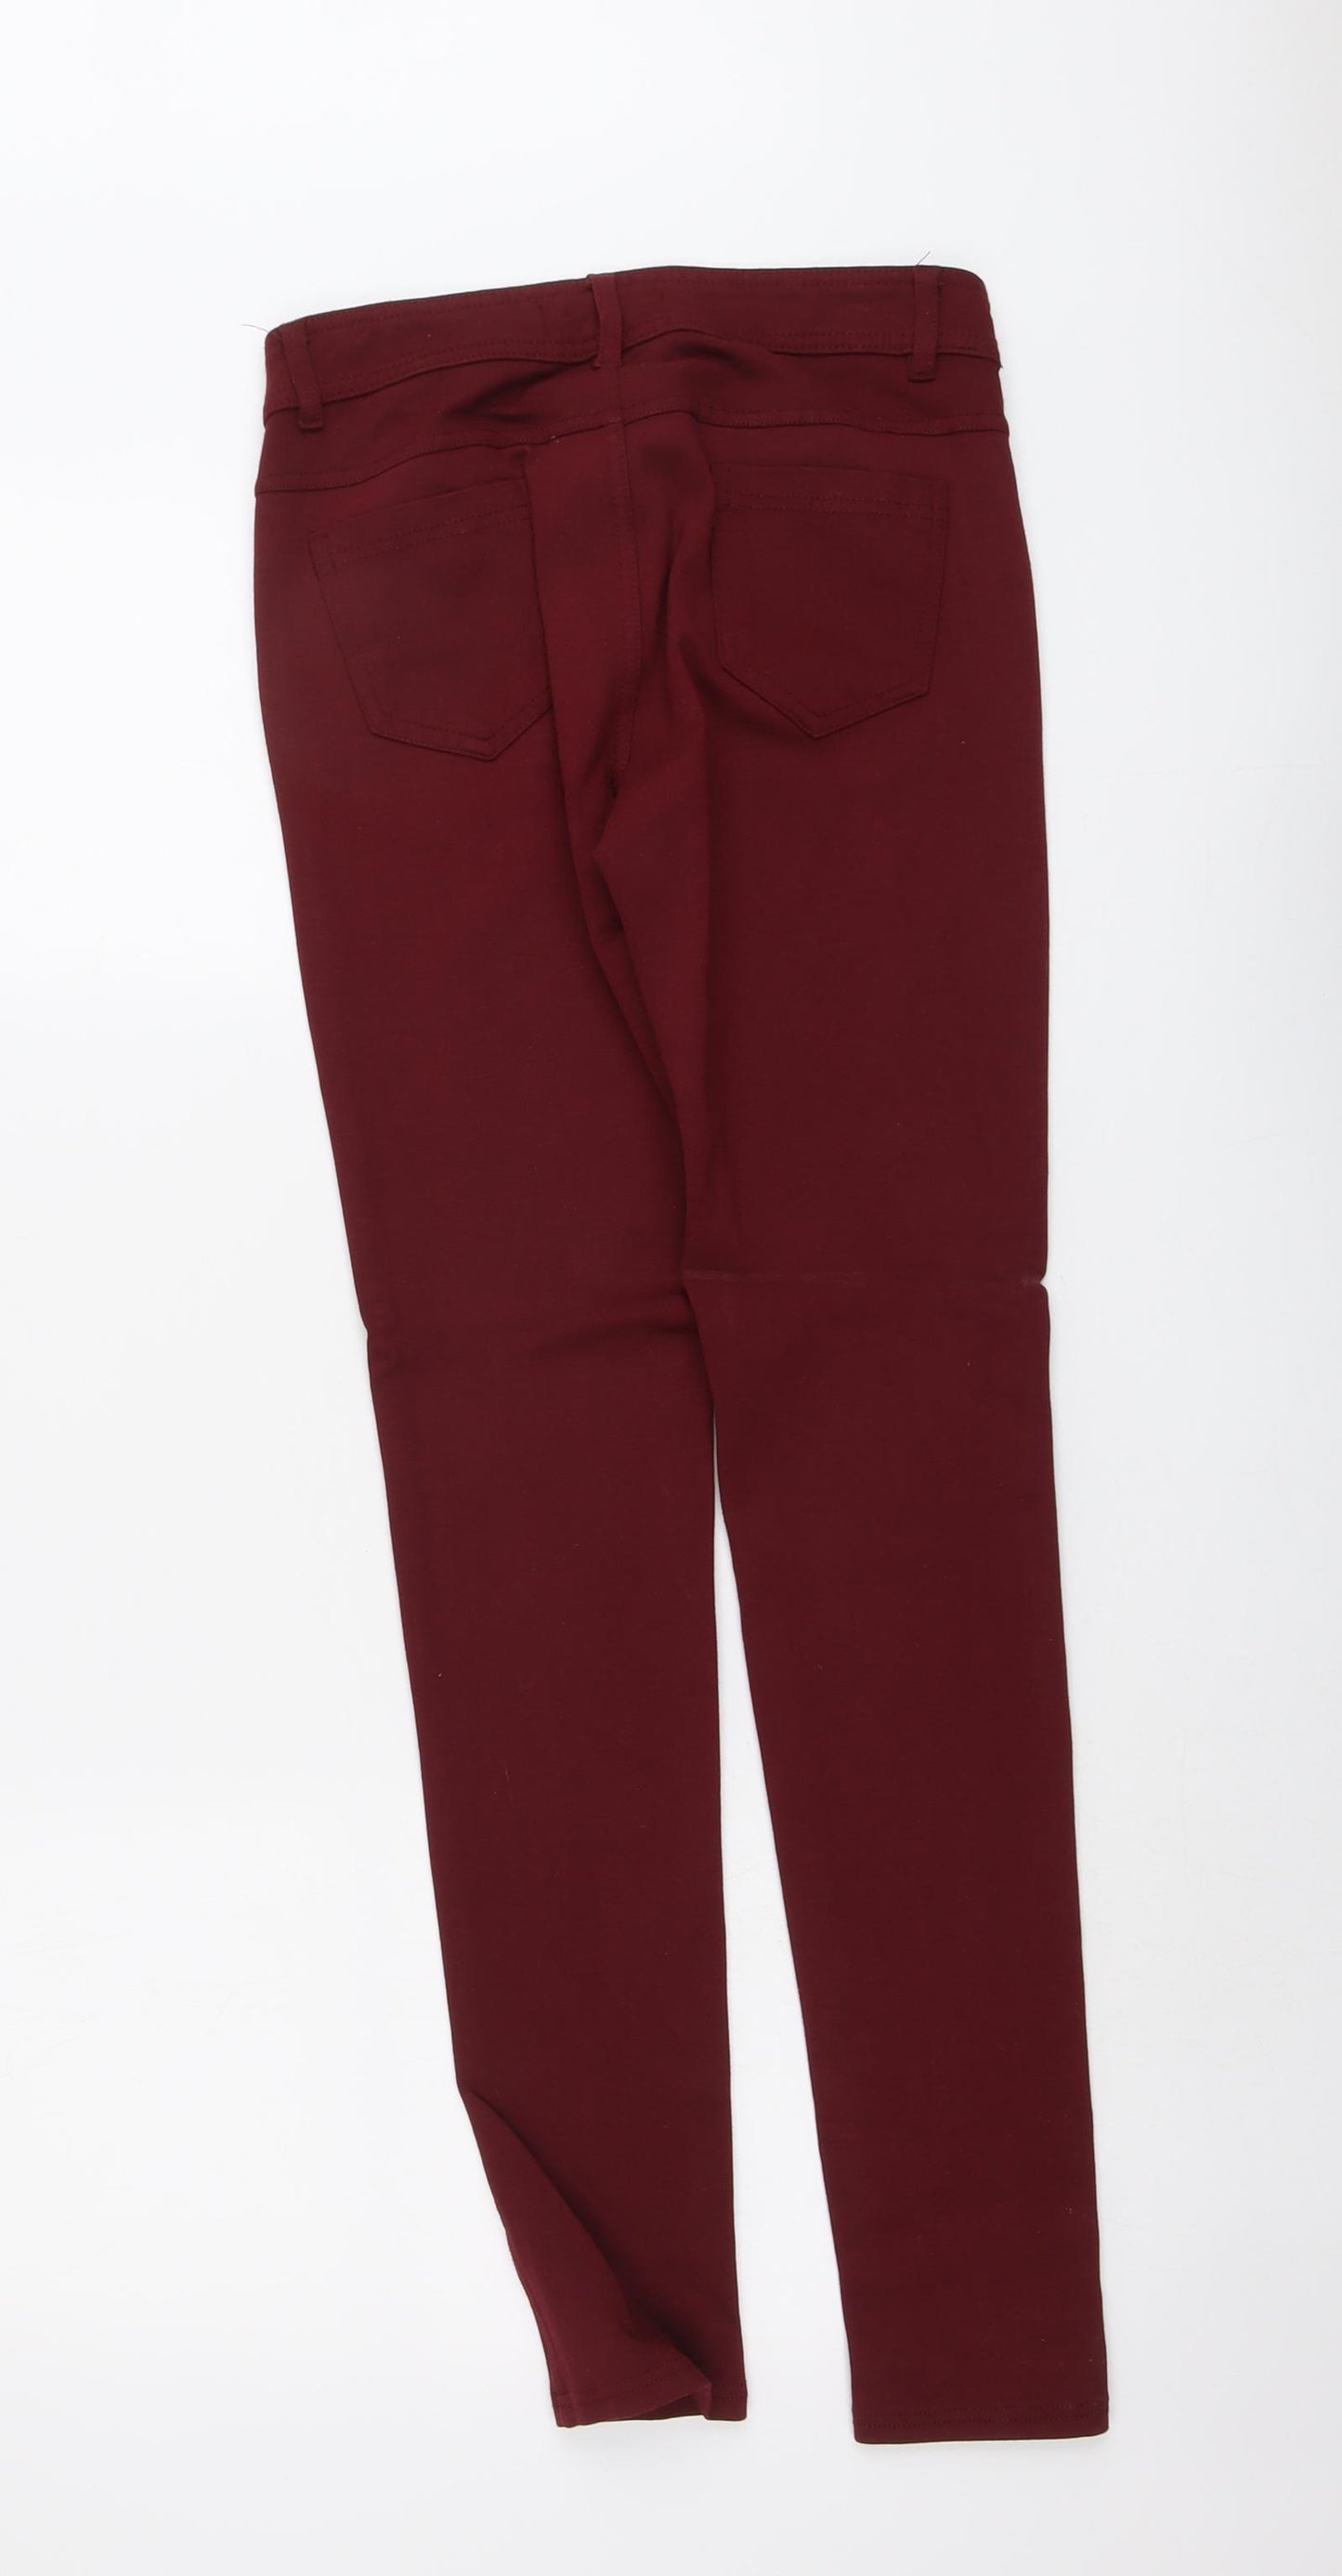 Vs. Miss Womens Red Cotton Trousers Size L L30 in Regular Button